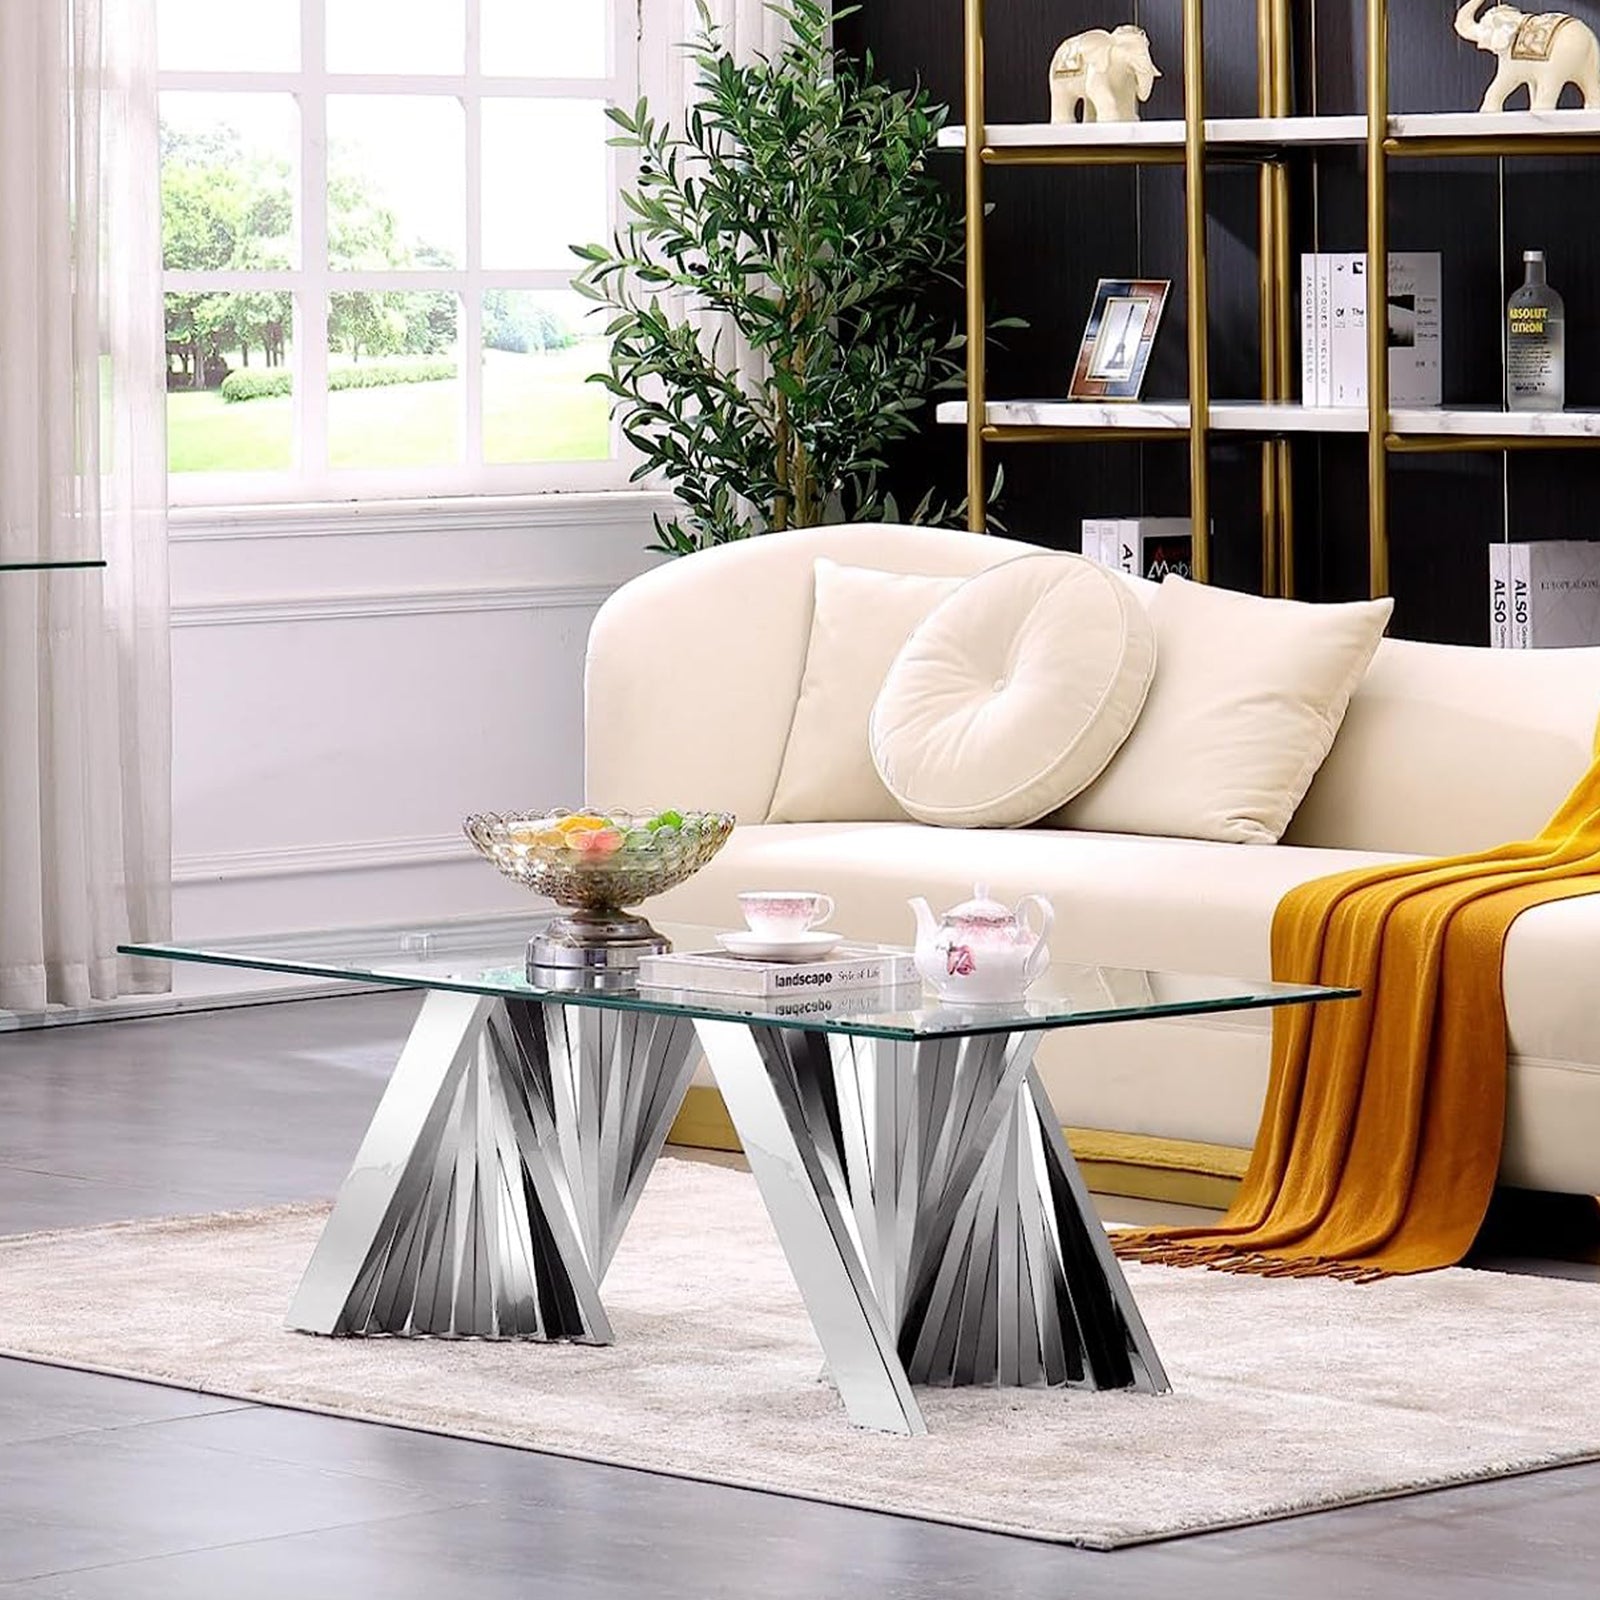 Enhance Your Space with a Stylish Glass Coffee Table